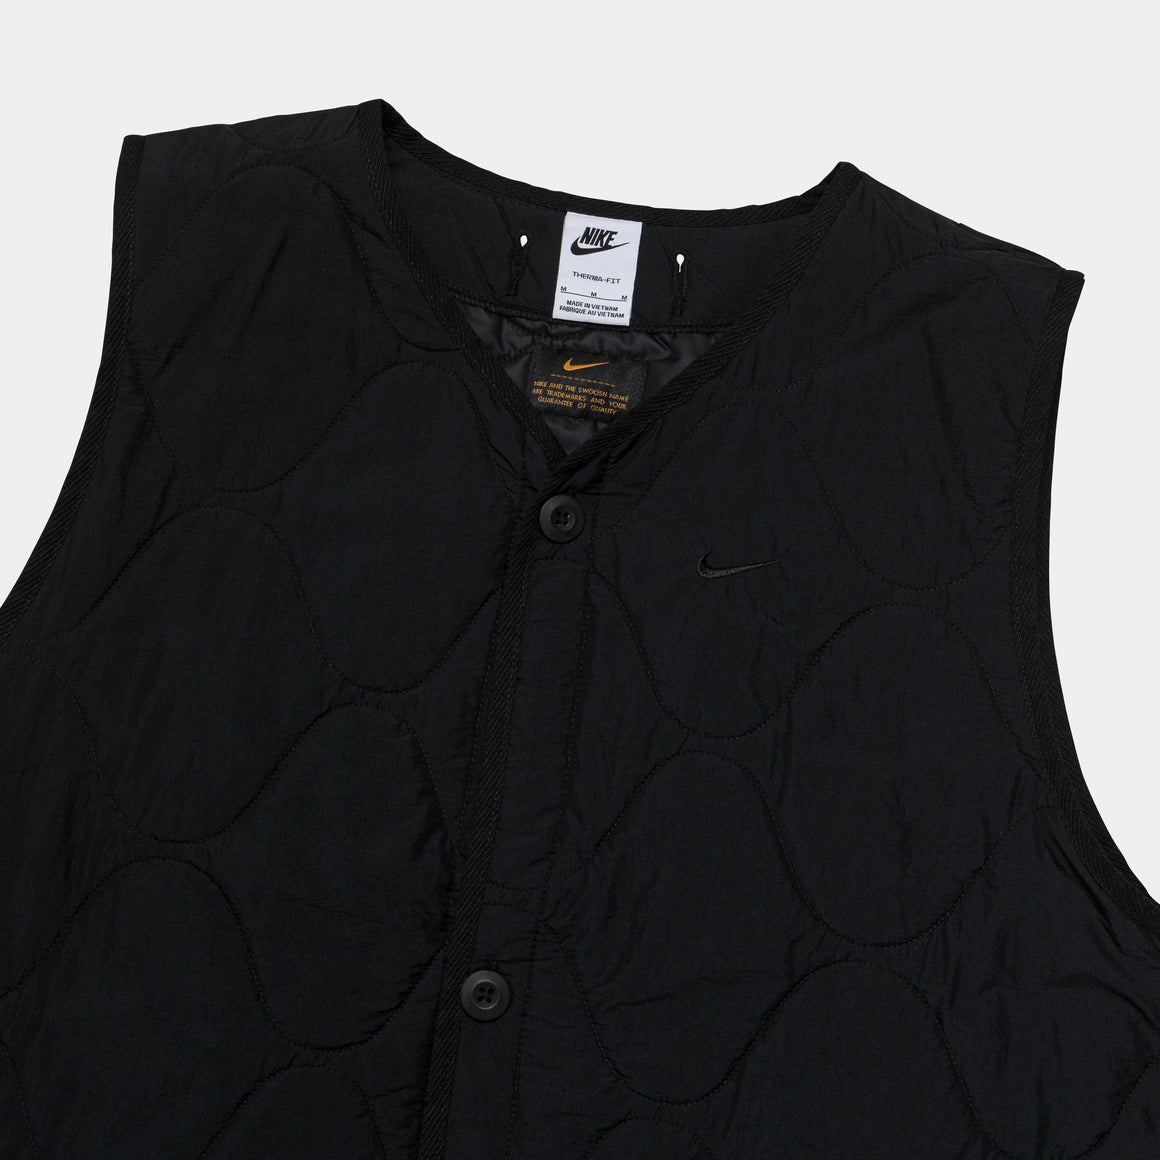 Nike Life Woven Insulated Military Vest - Black